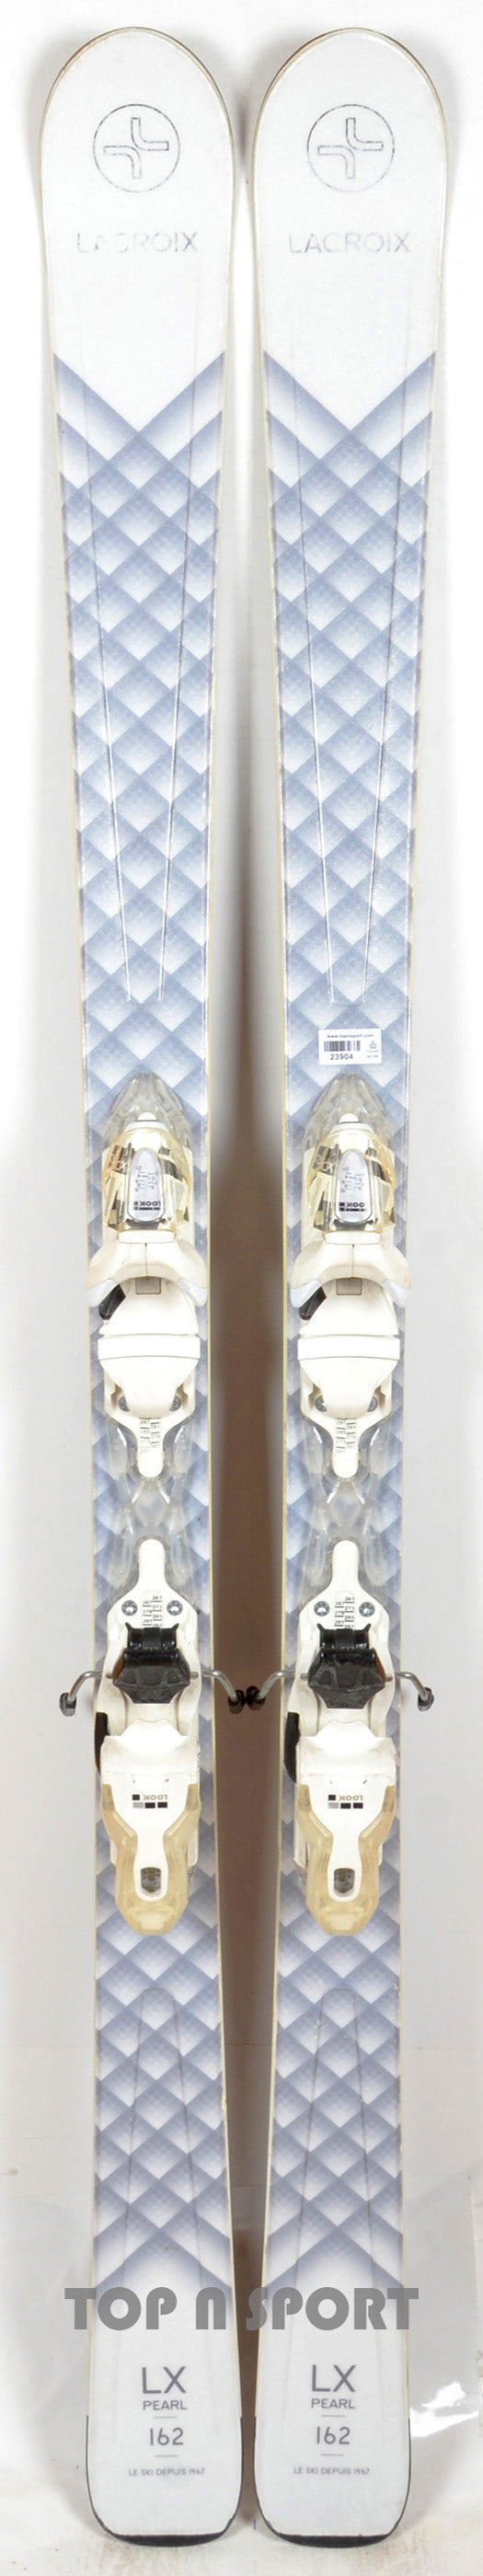 LACROIX LX PEARL white - skis d'occasion Femme